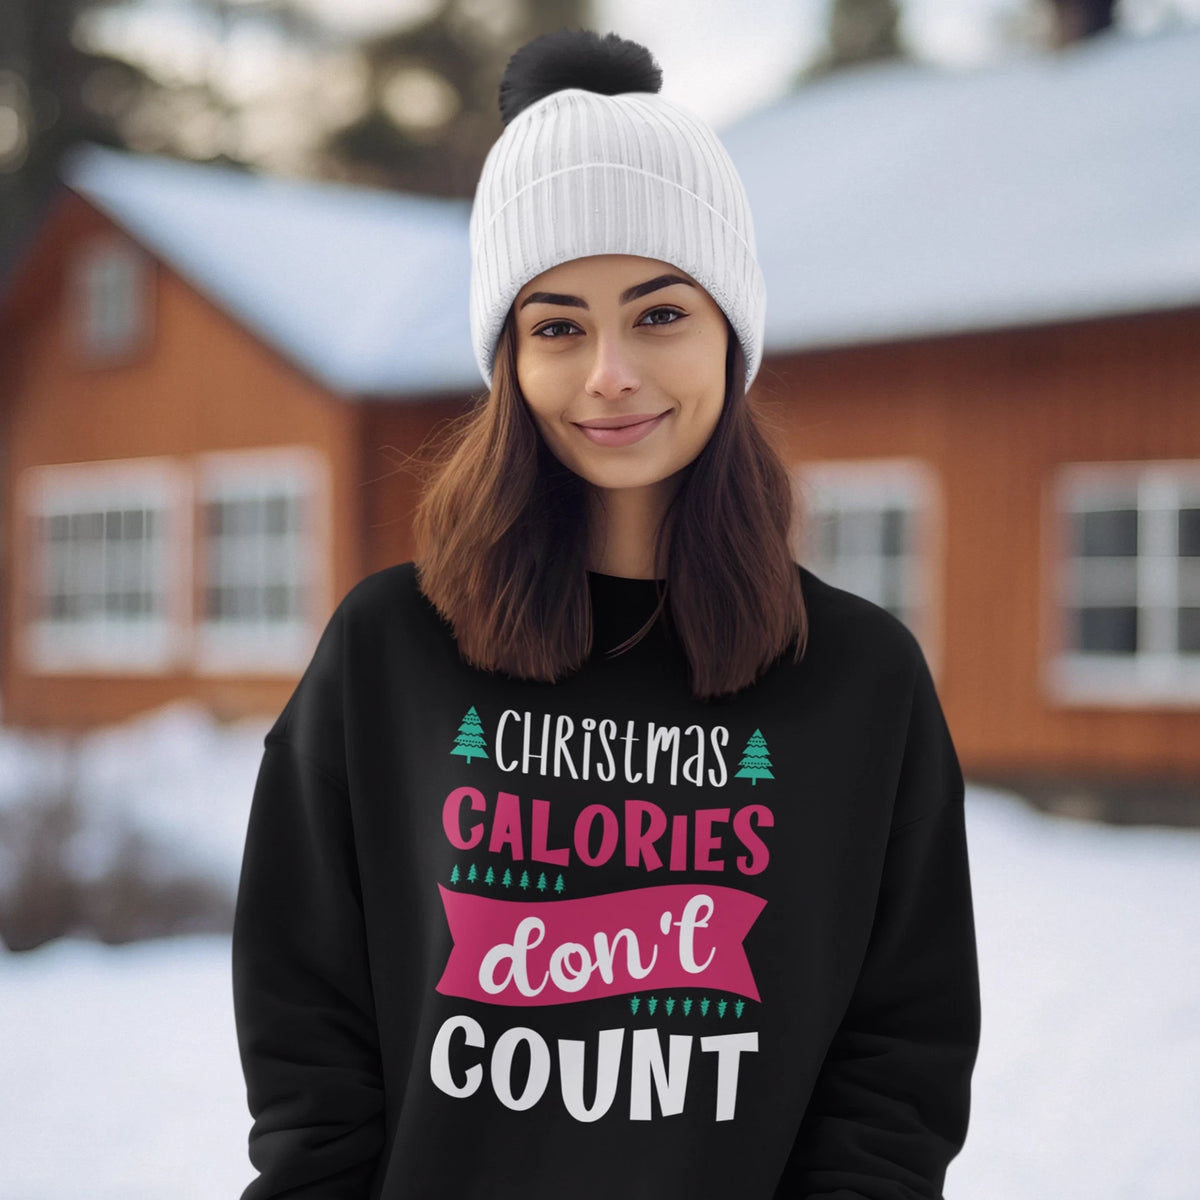 Christmas Calories Don't Count | Unisex Christmas Sweater Chroma Clothing